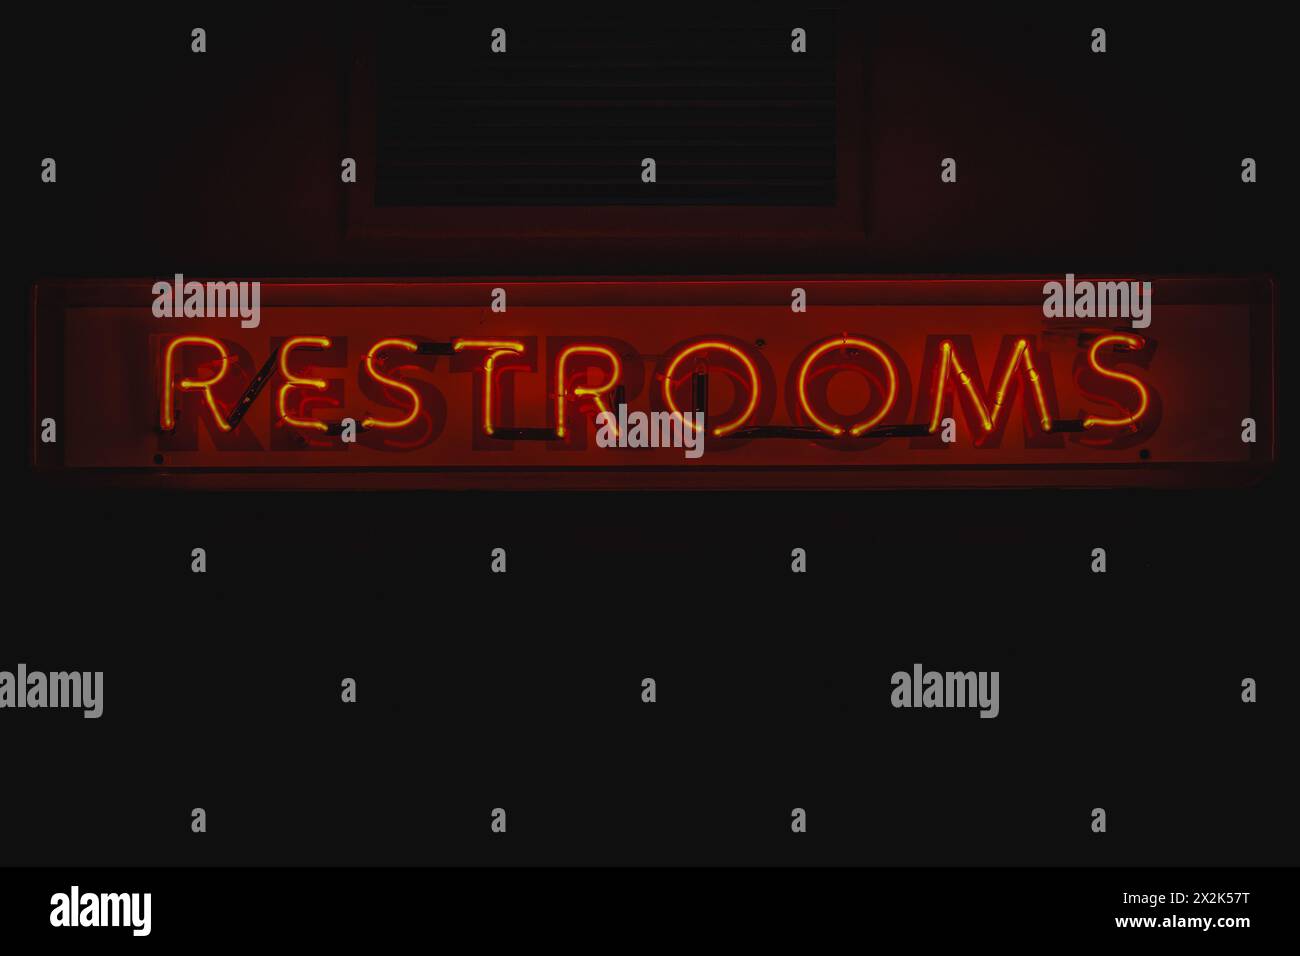 A vibrant red neon sign displaying the word 'RESTROOMS' mounted on a dark wall, emitting a soft glowing light in a dimly lit ambiance. Stock Photo